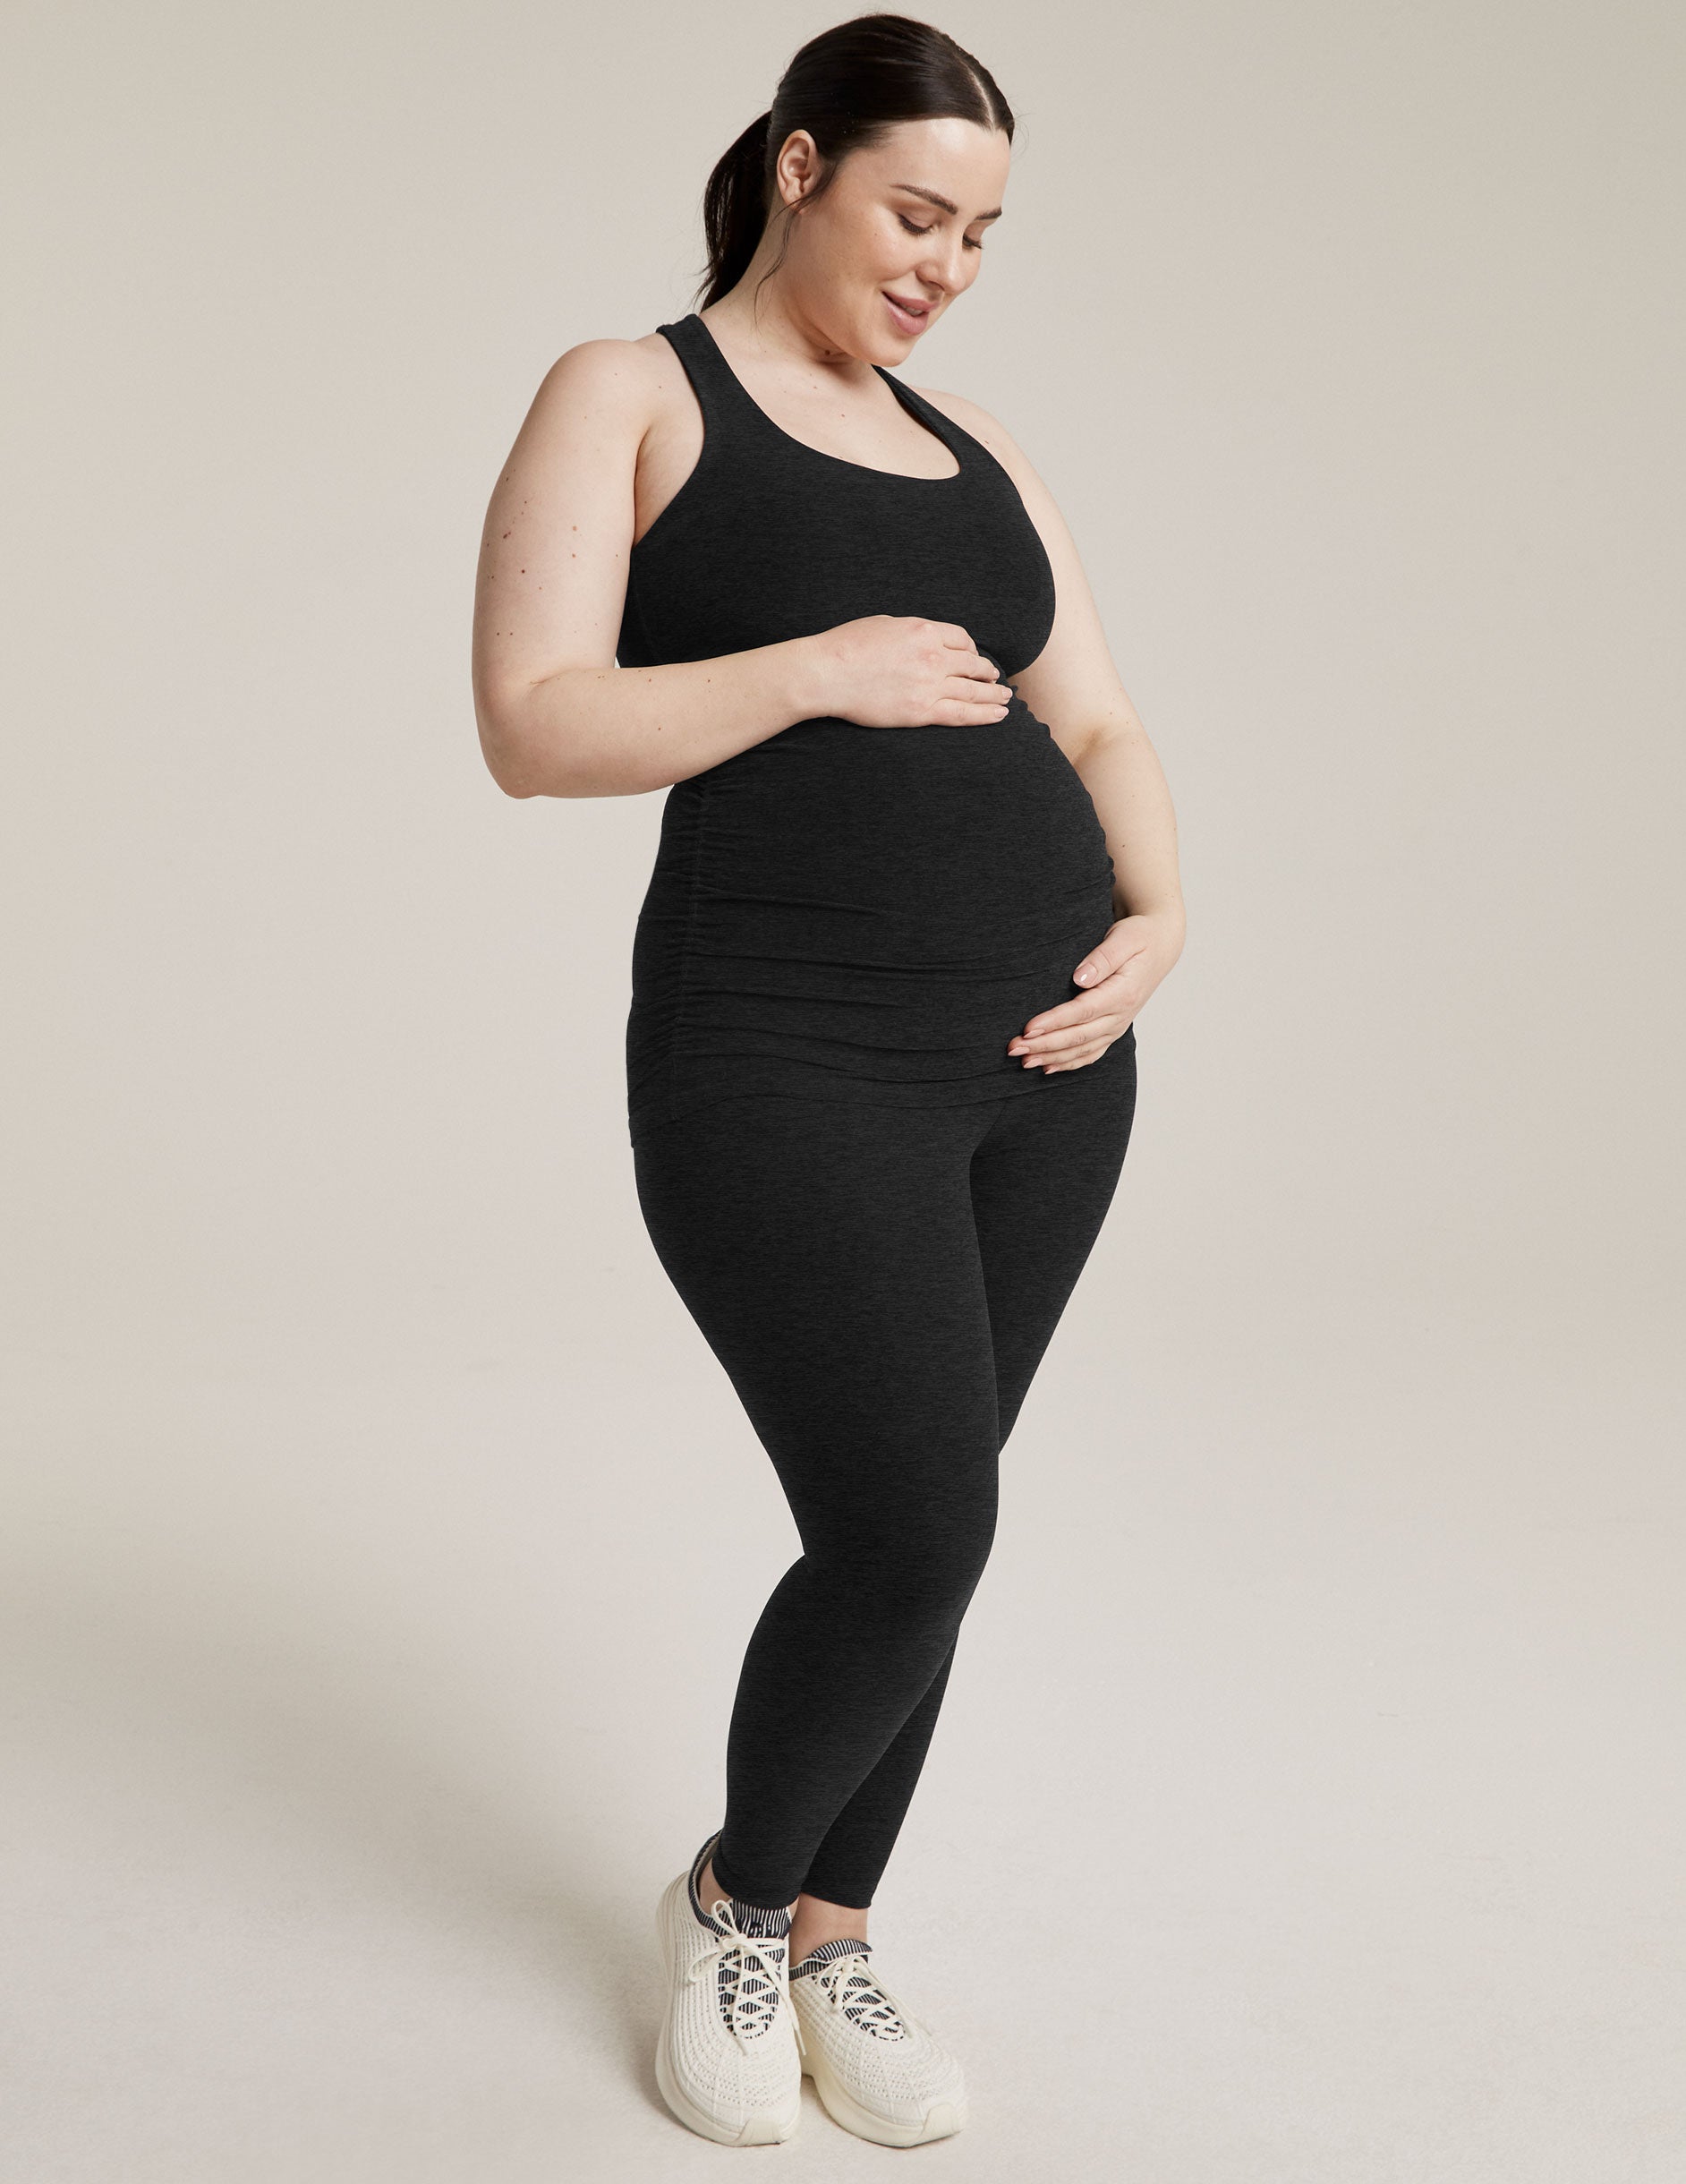 Super Plus Size Maternity Clothes [Size 3XL And Beyond]